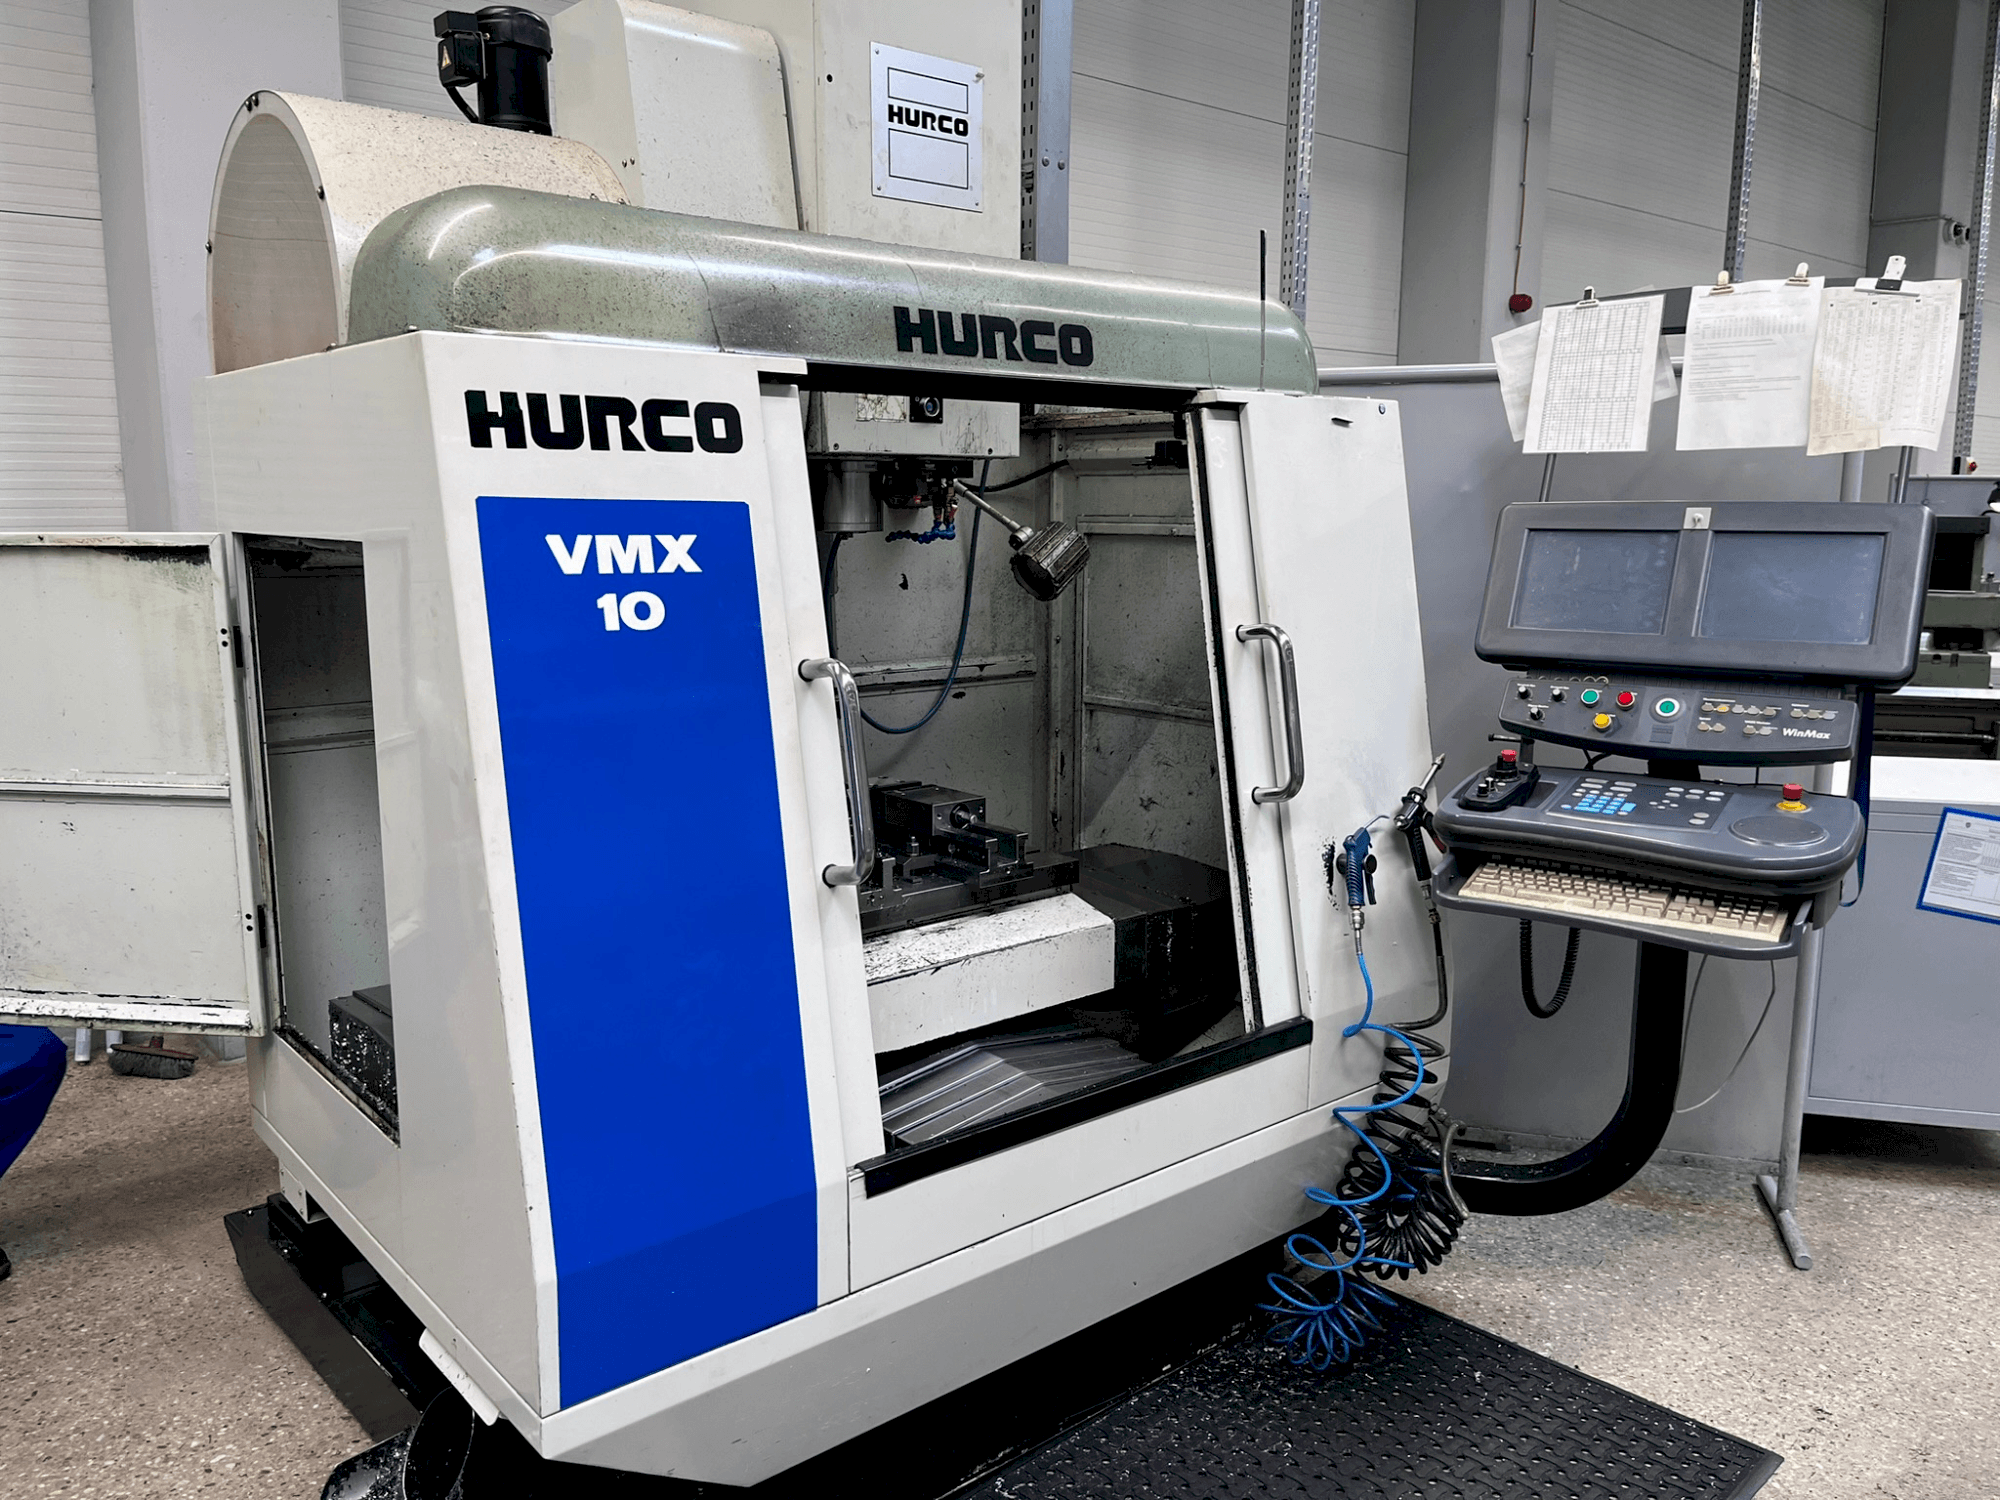 Front view of Hurco VMX 10  machine